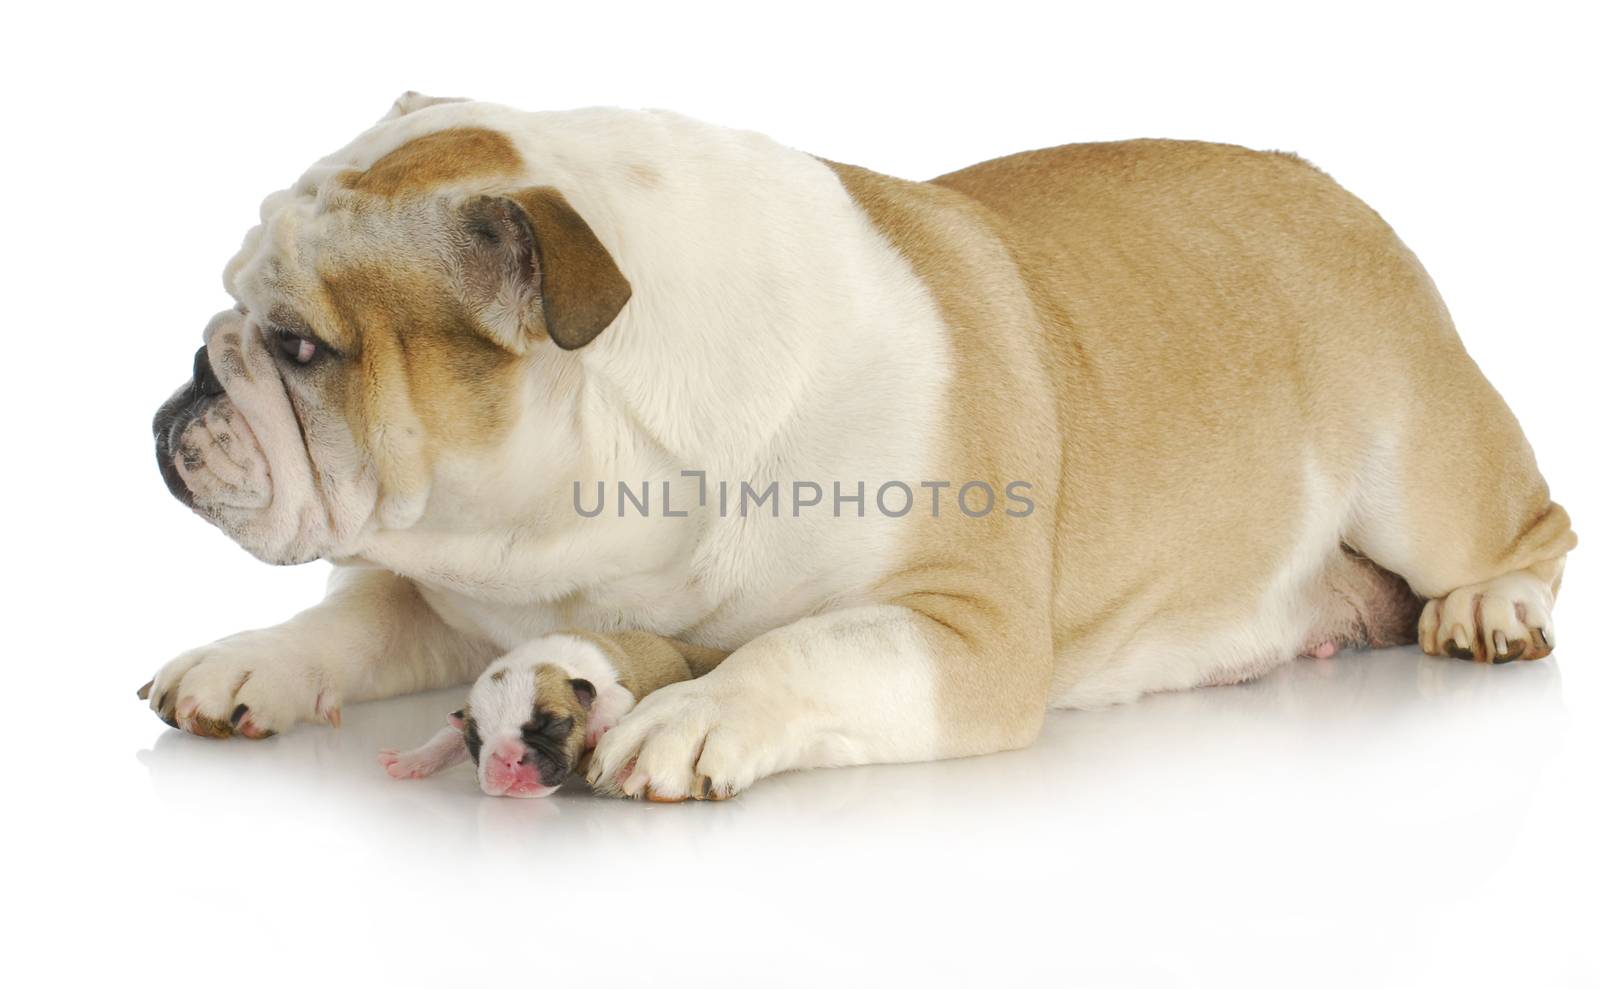 protective mother dog - english bulldog mother with one week old baby on white background